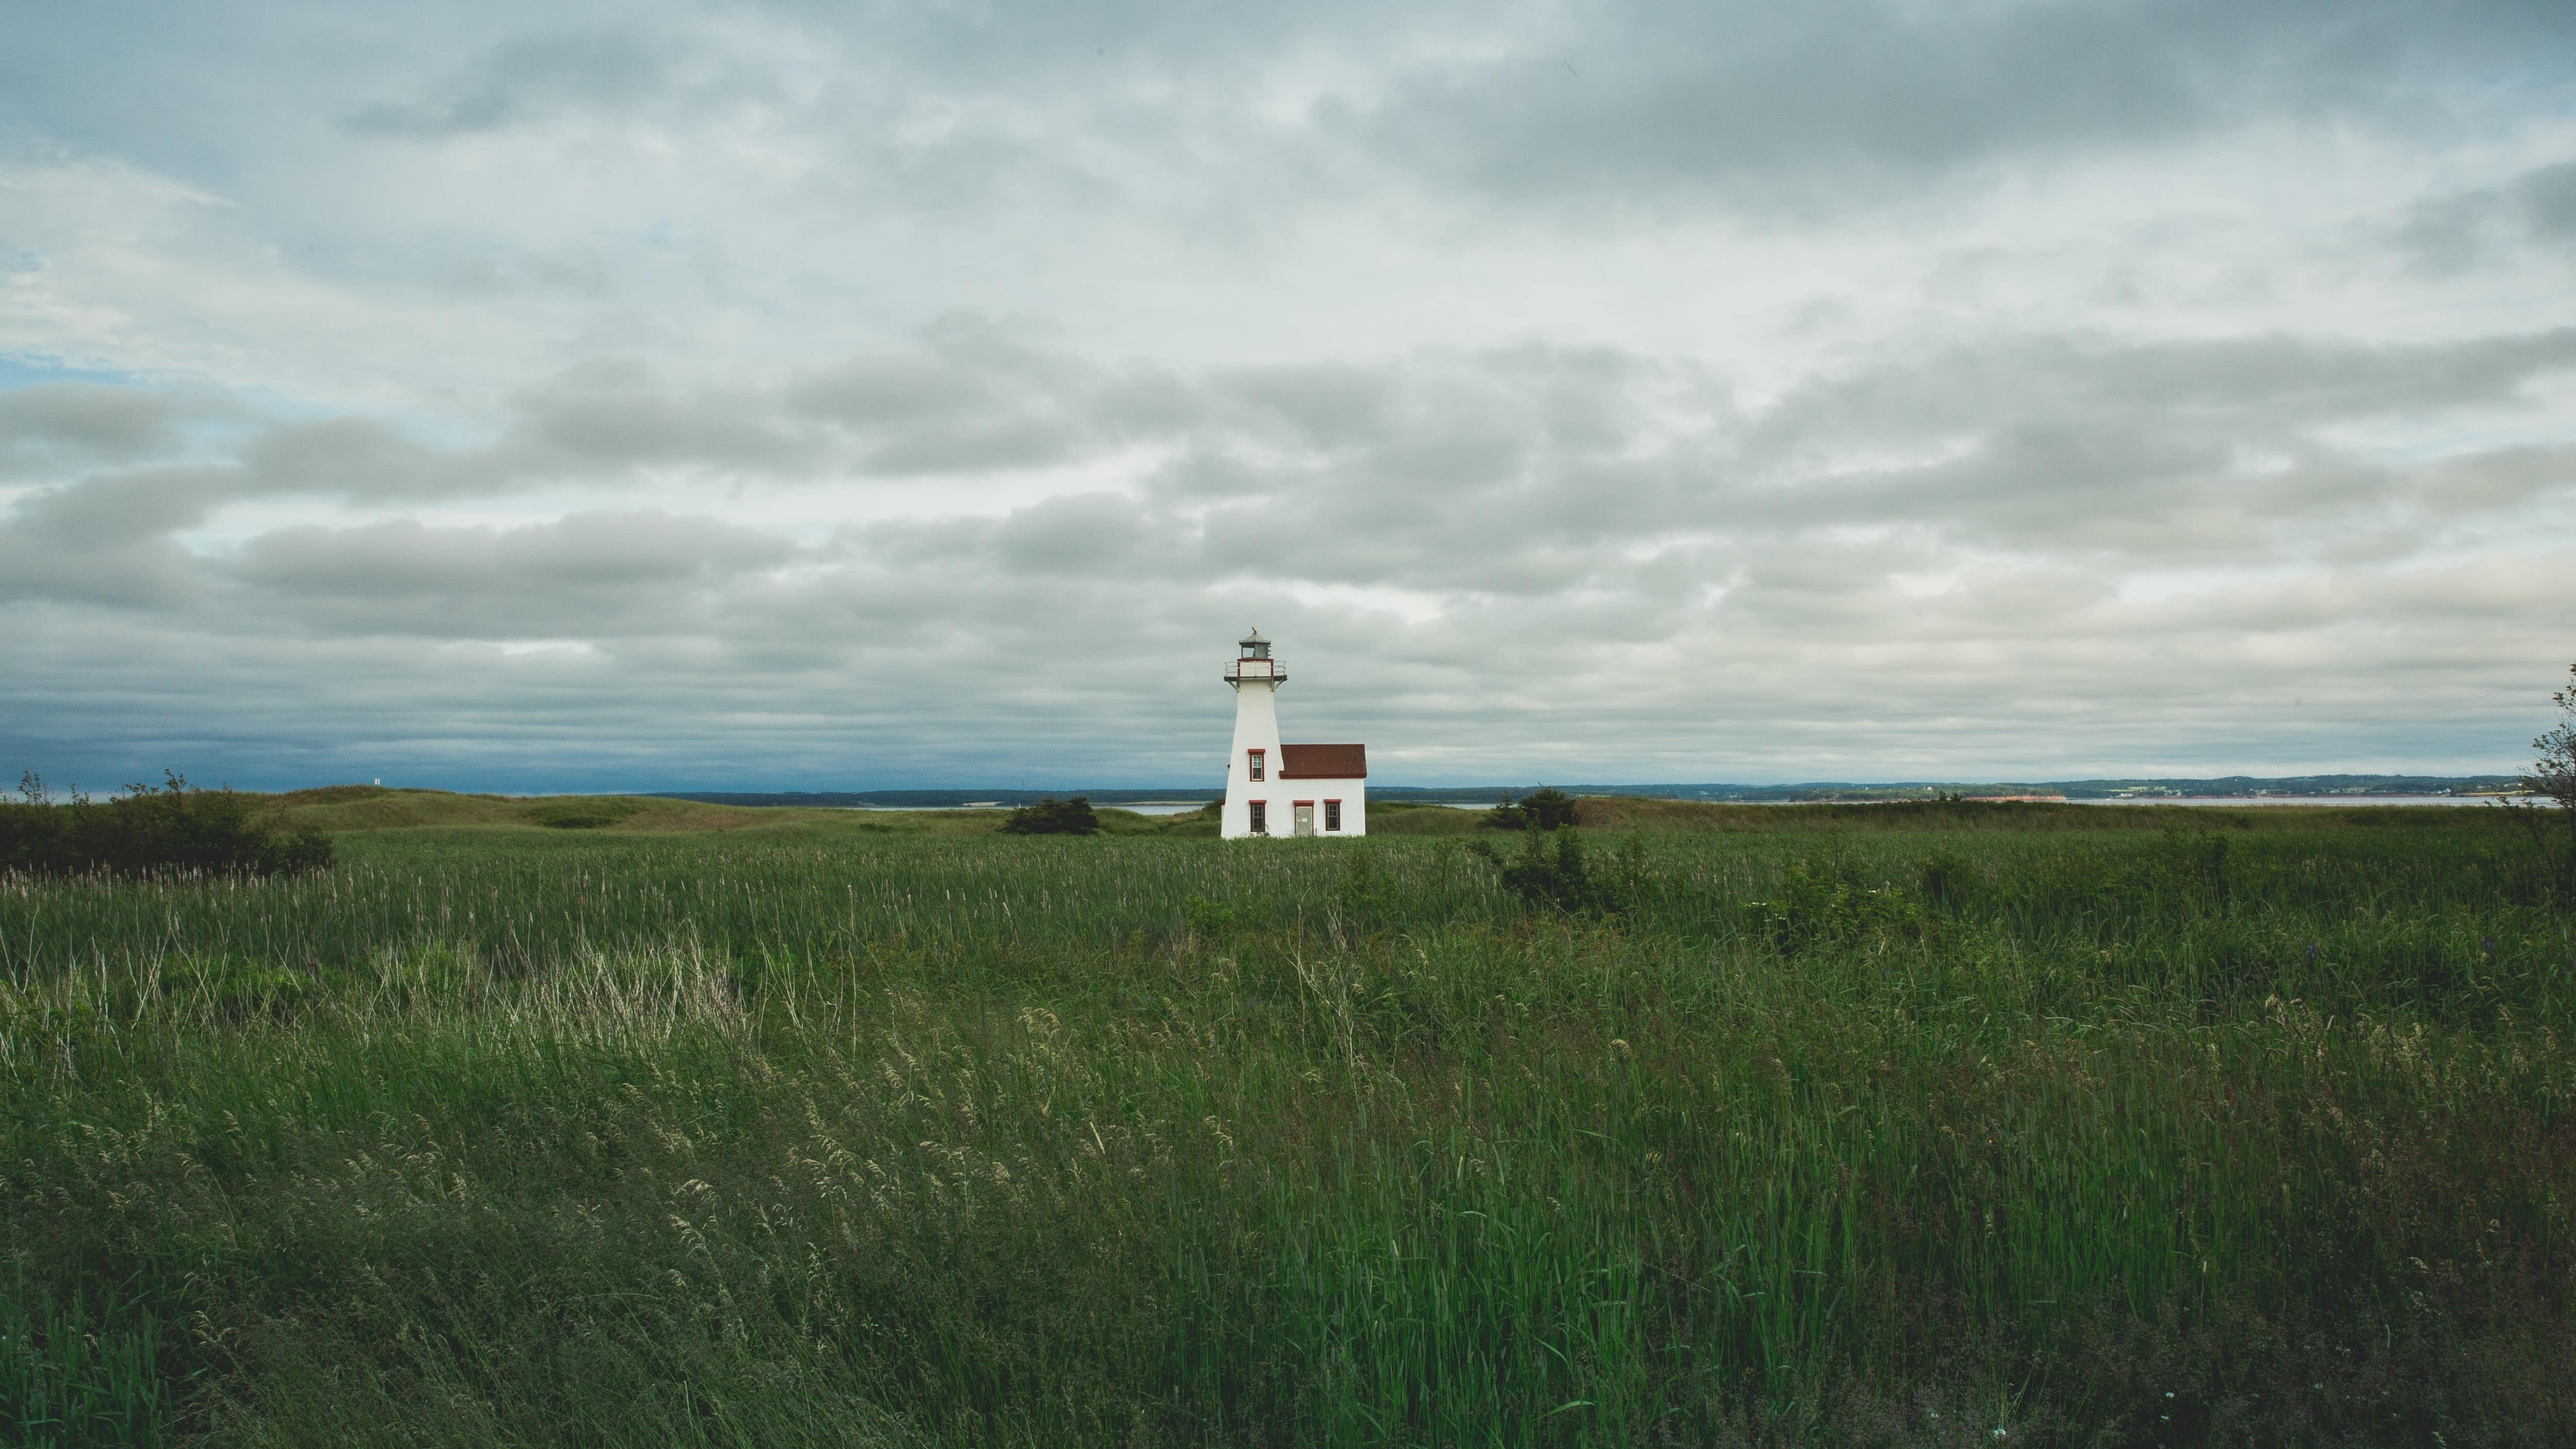 Find the best cabin rentals in Prince Edward Island to explore the pastoral landscape